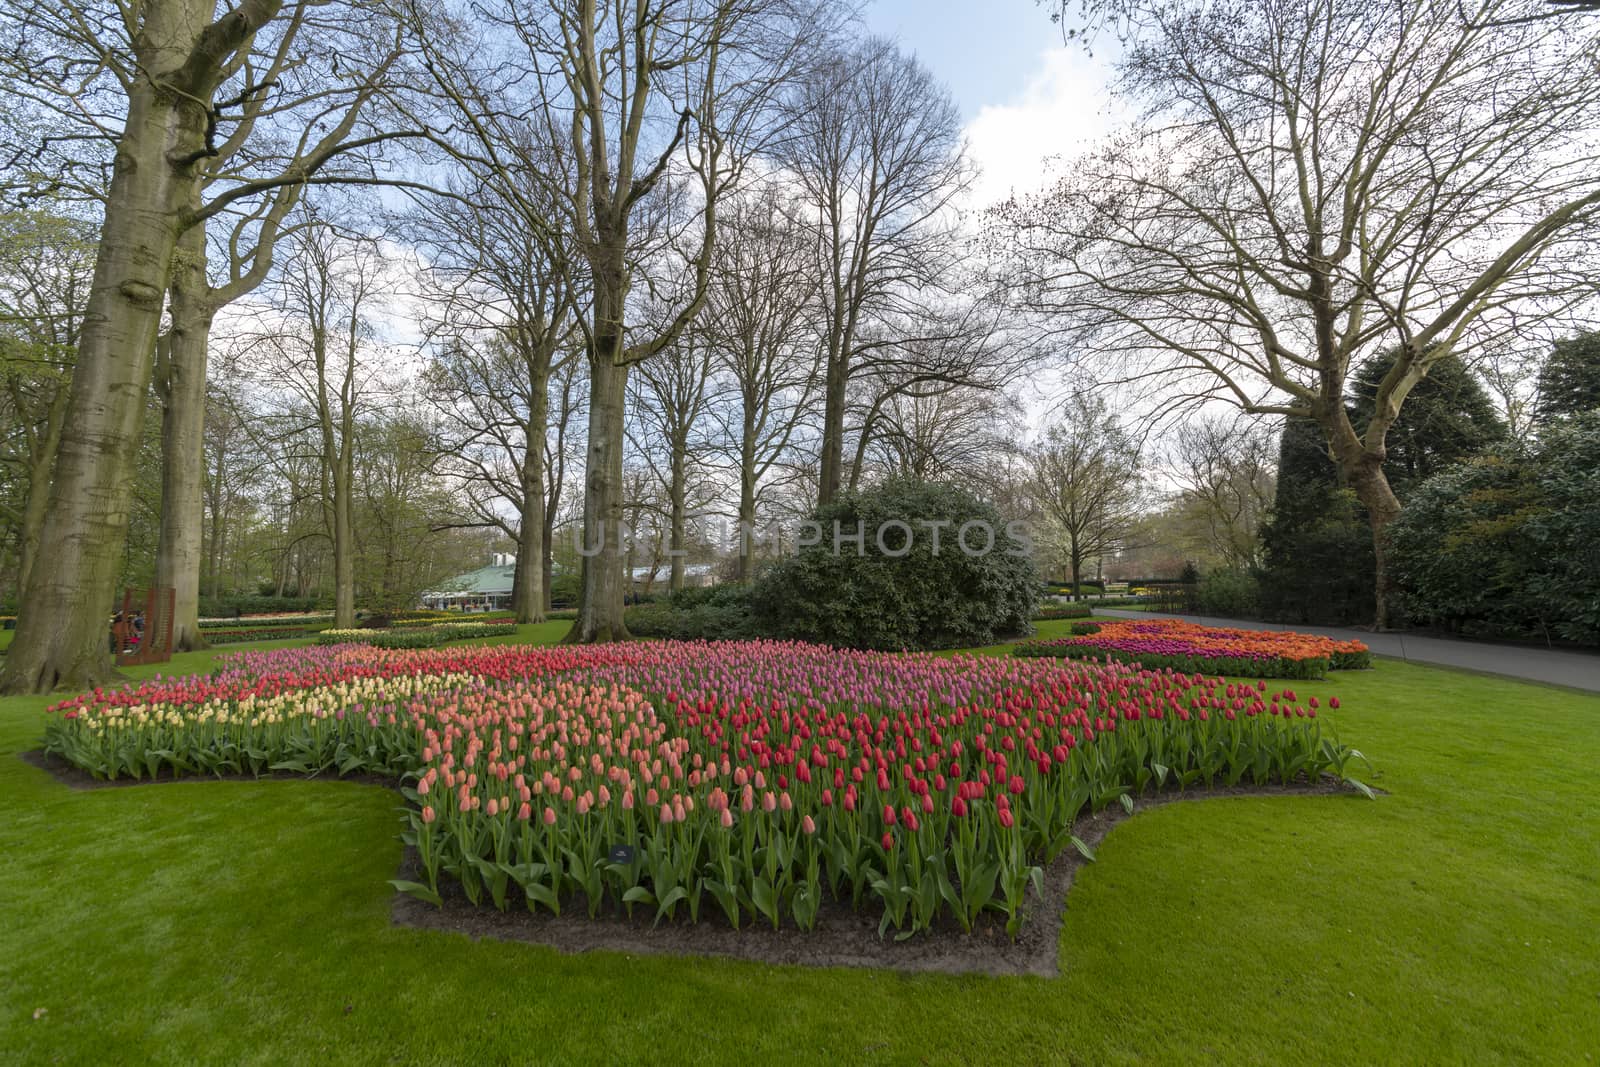 Yellow Daffodil and multi color tulips blossom blooming under a very well maintained garden in spring time by ankorlight